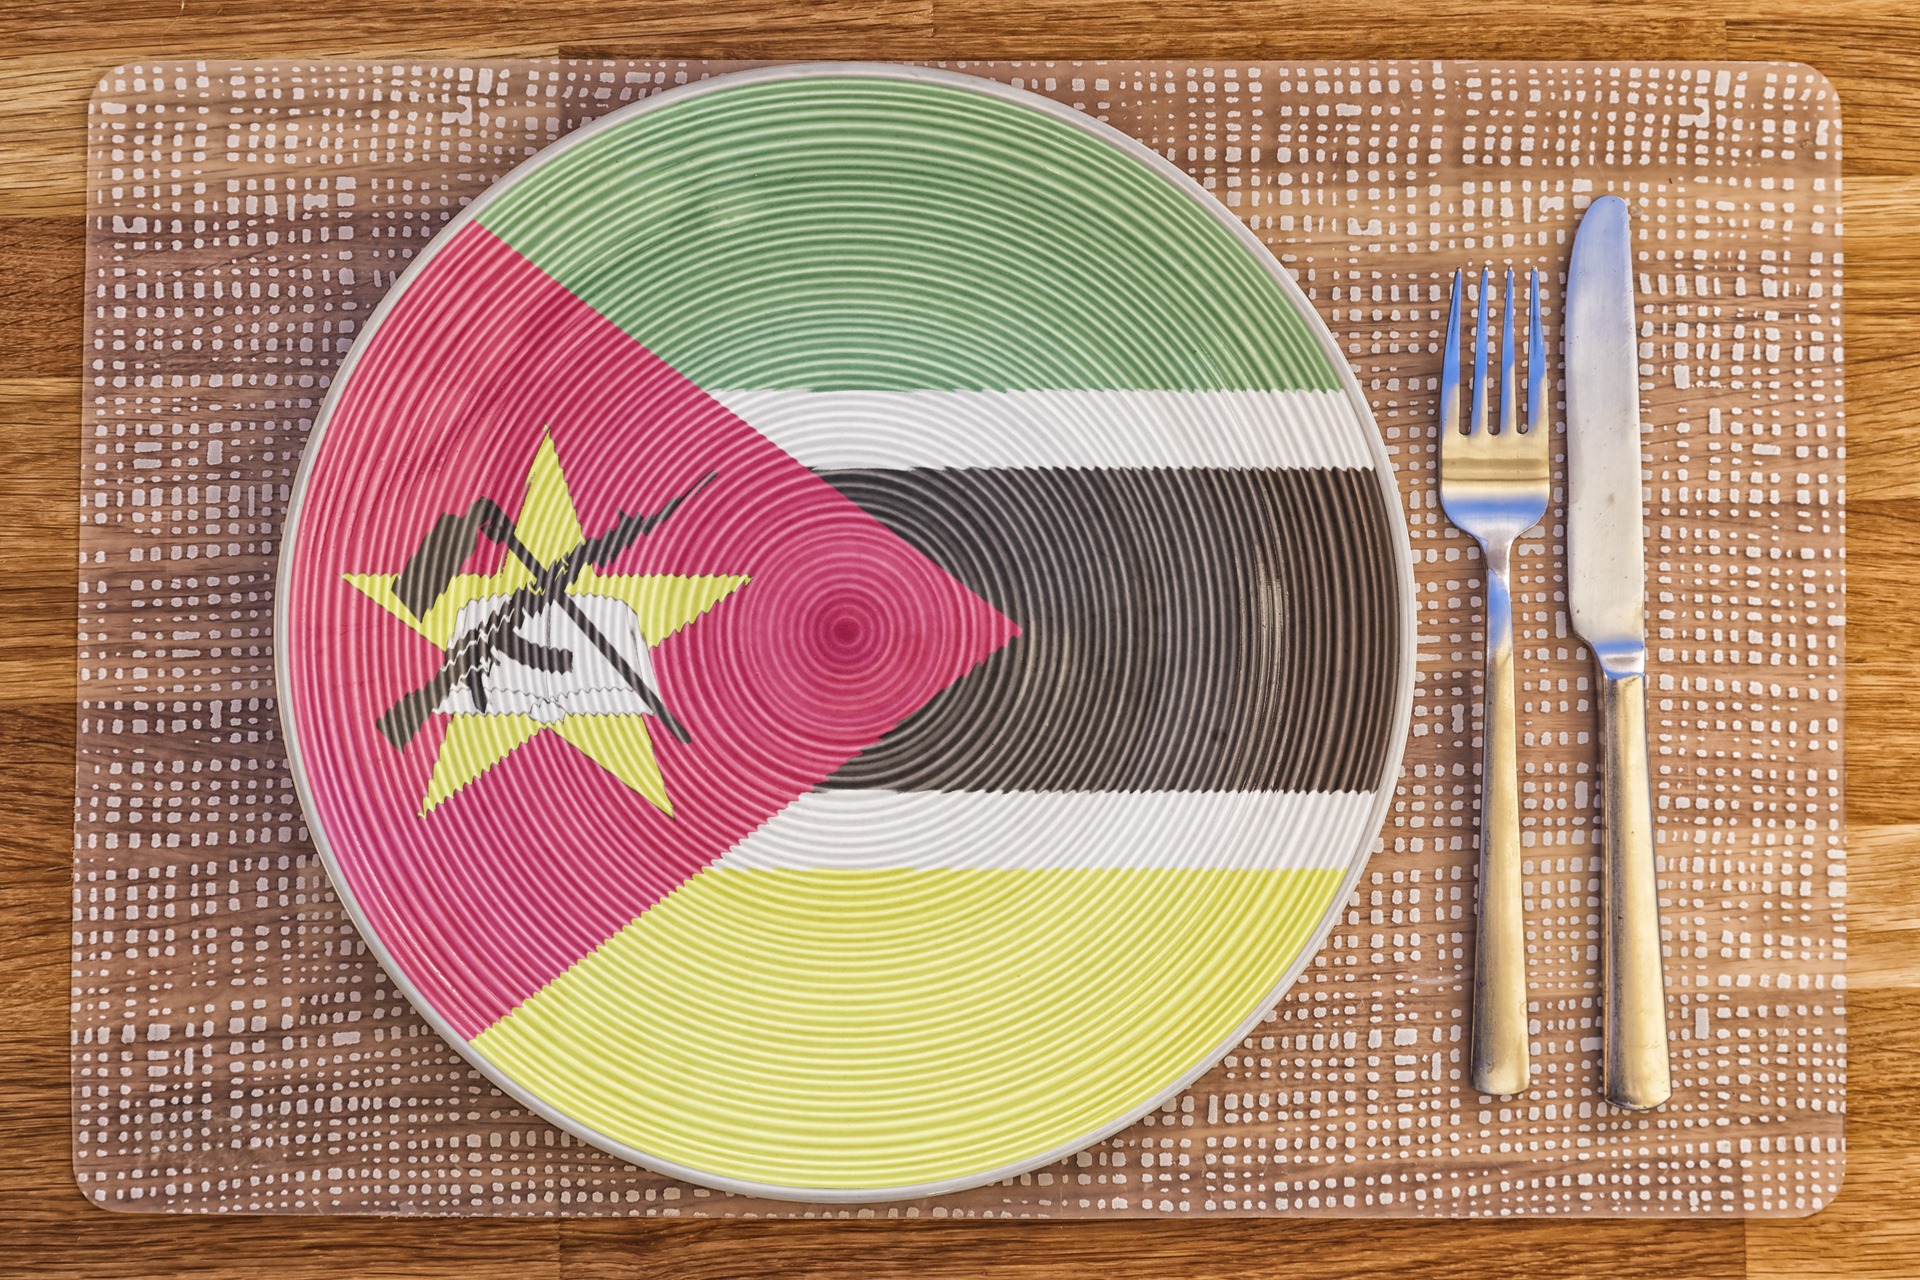 What to eat in Mozambique